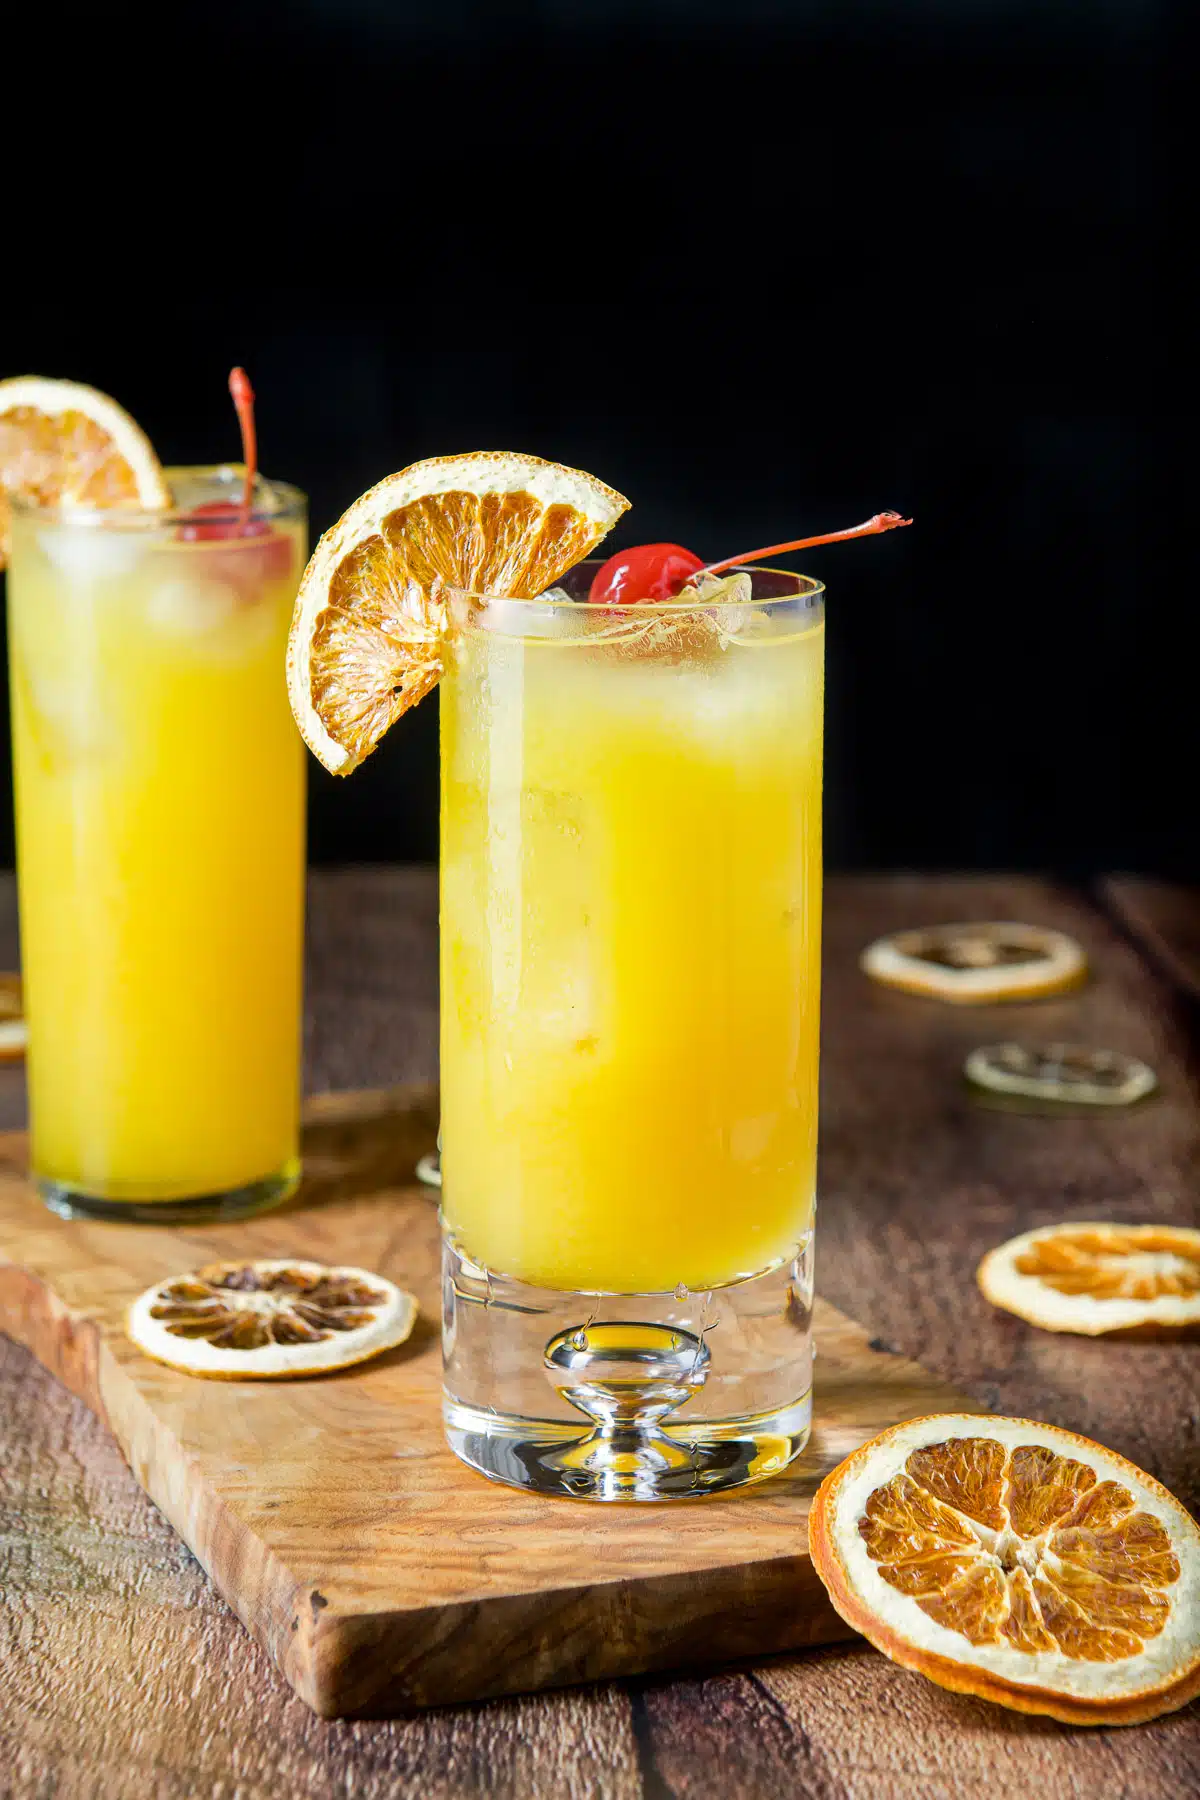 Vertical view of the two glasses on a board with the orange cocktail in it along with orange wheels and cherries